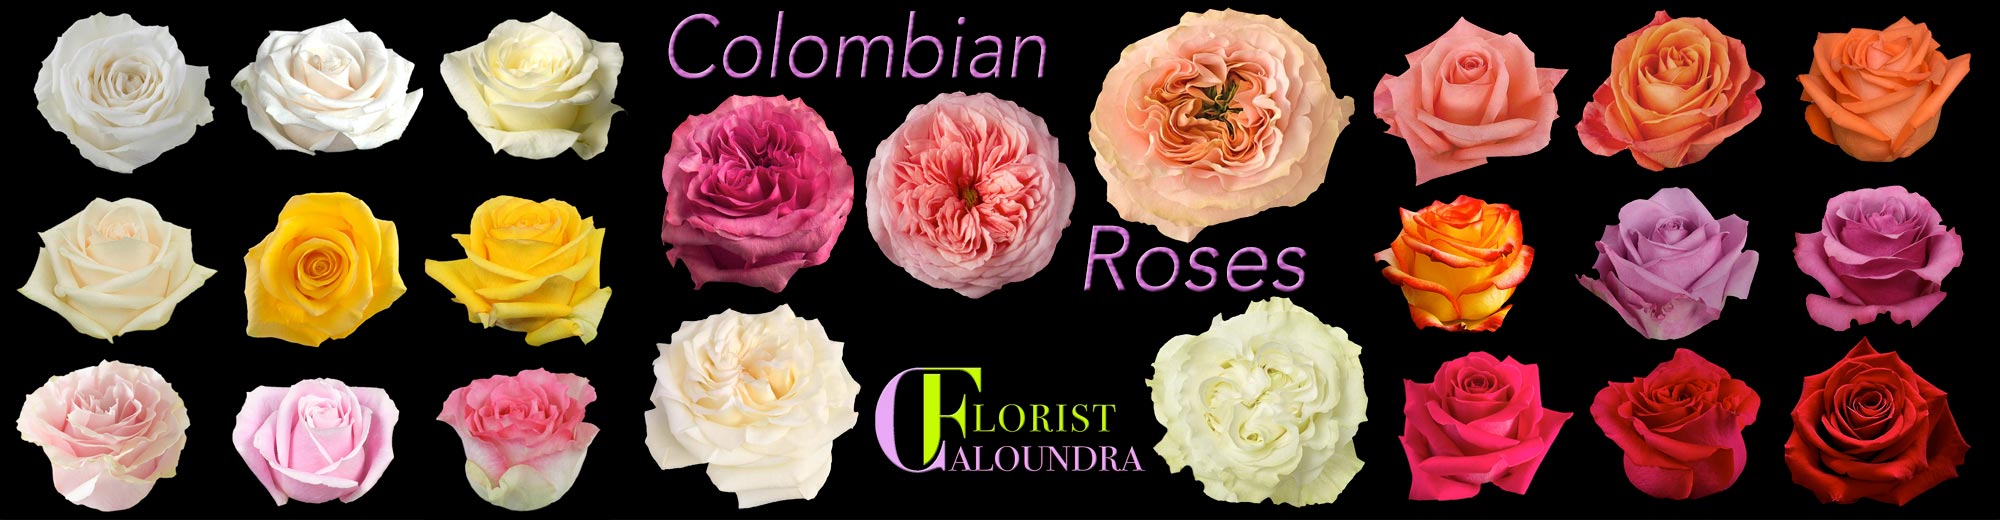 COLOMBIAN ROSES SIMPLE CART